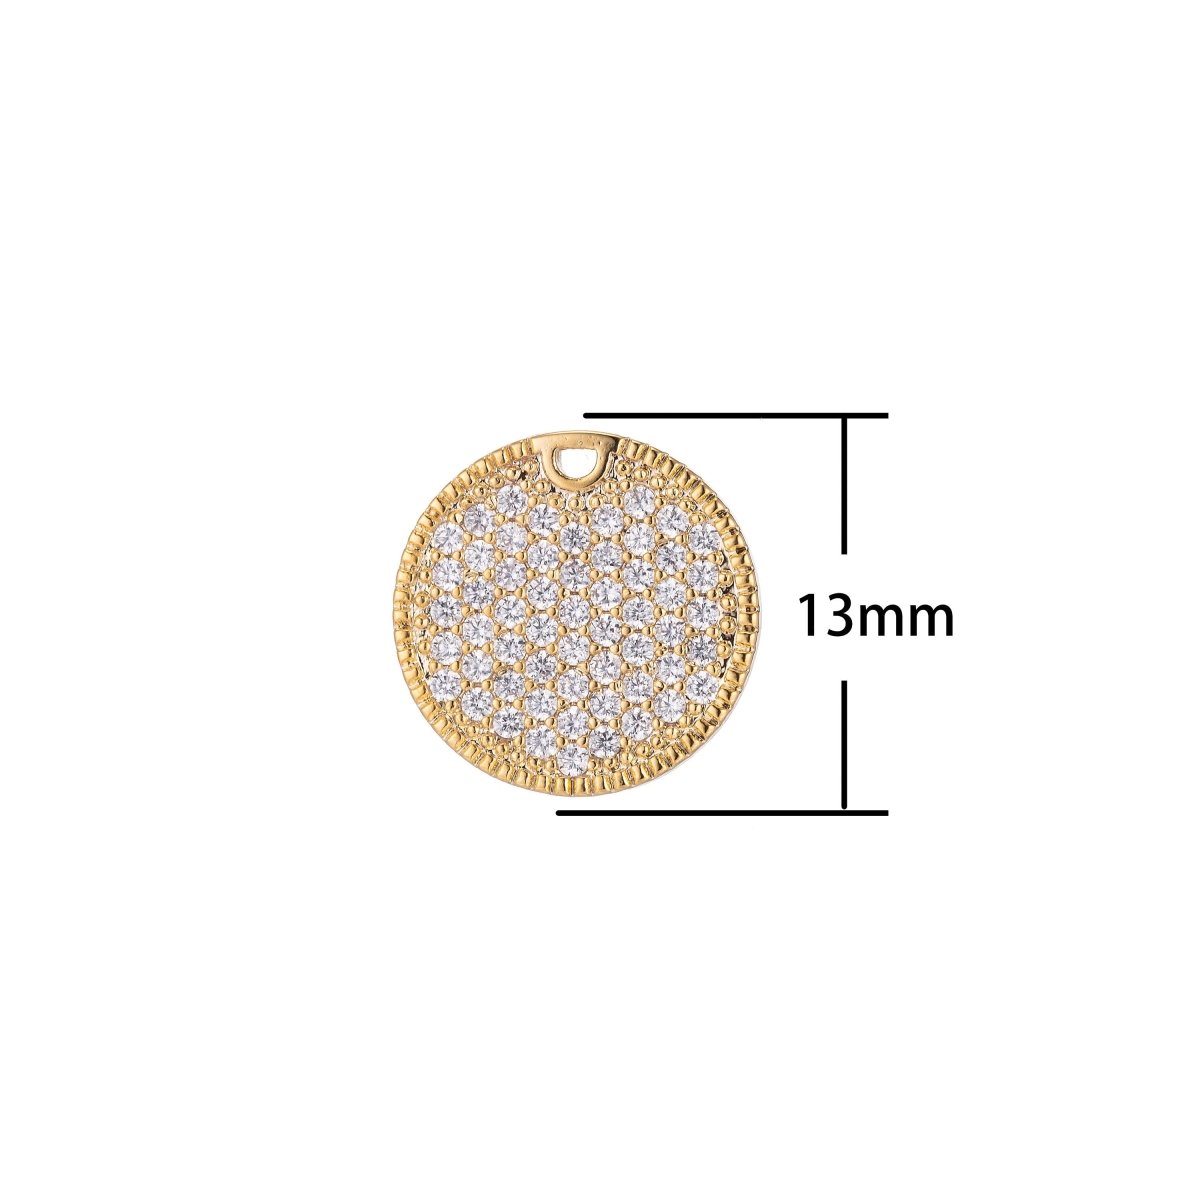 Dainty Round Gold Crystal Charm, Micro Pave CZ Charm, 18K Gold Filled Pendant Circle Geometric Necklace Charm for Jewelry MakingC-381 - DLUXCA